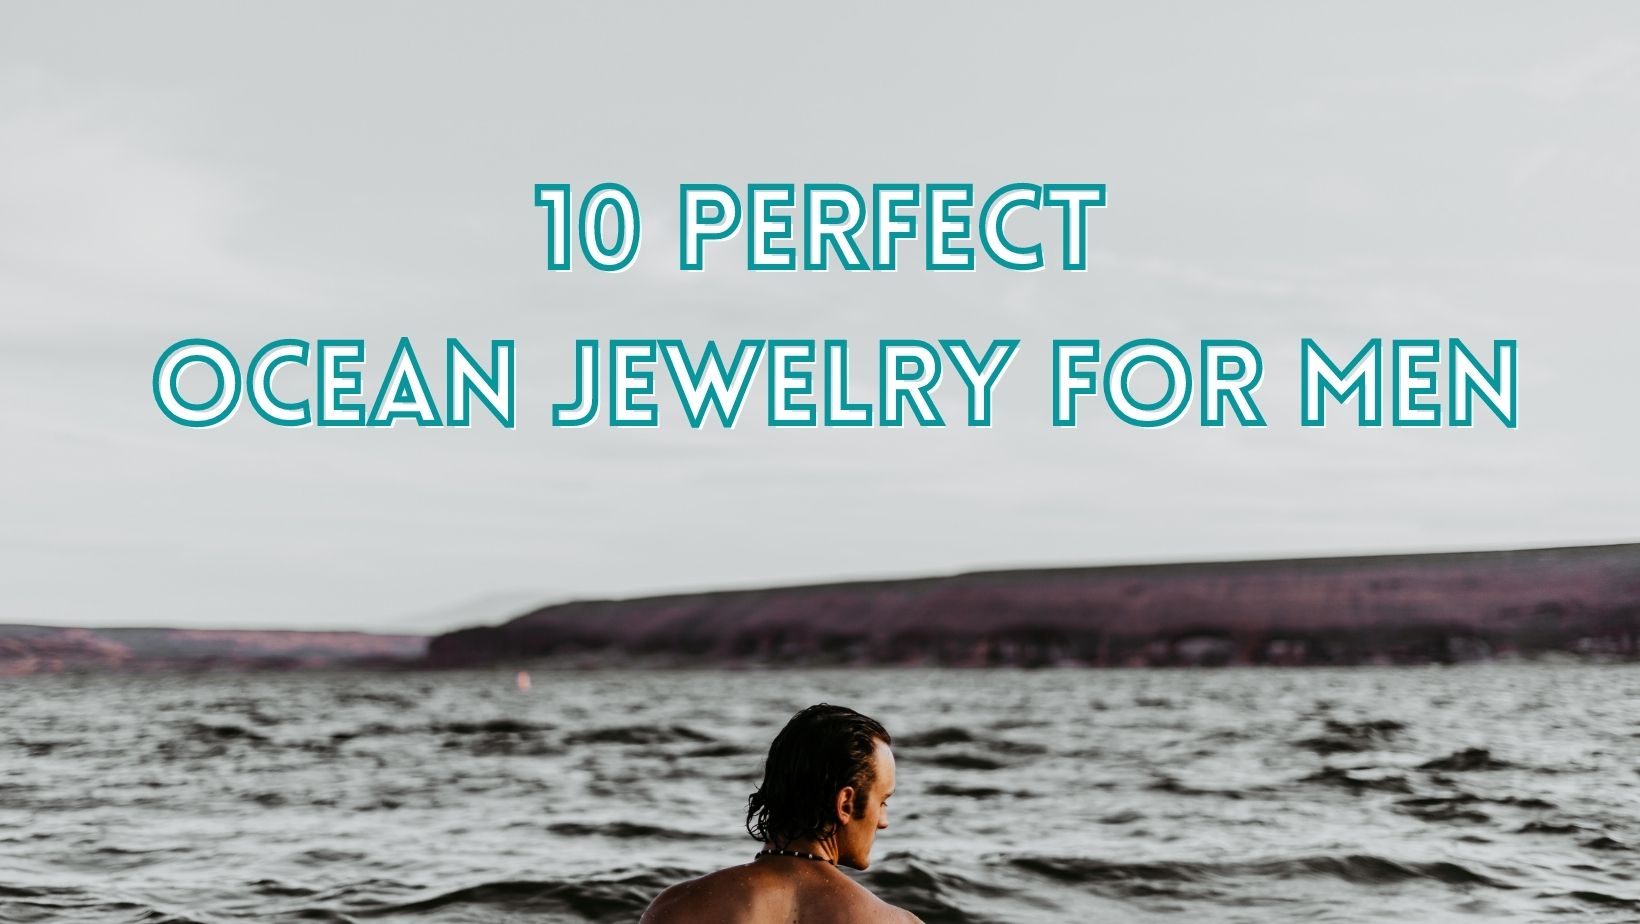 Perfect ocean jewelry to give men